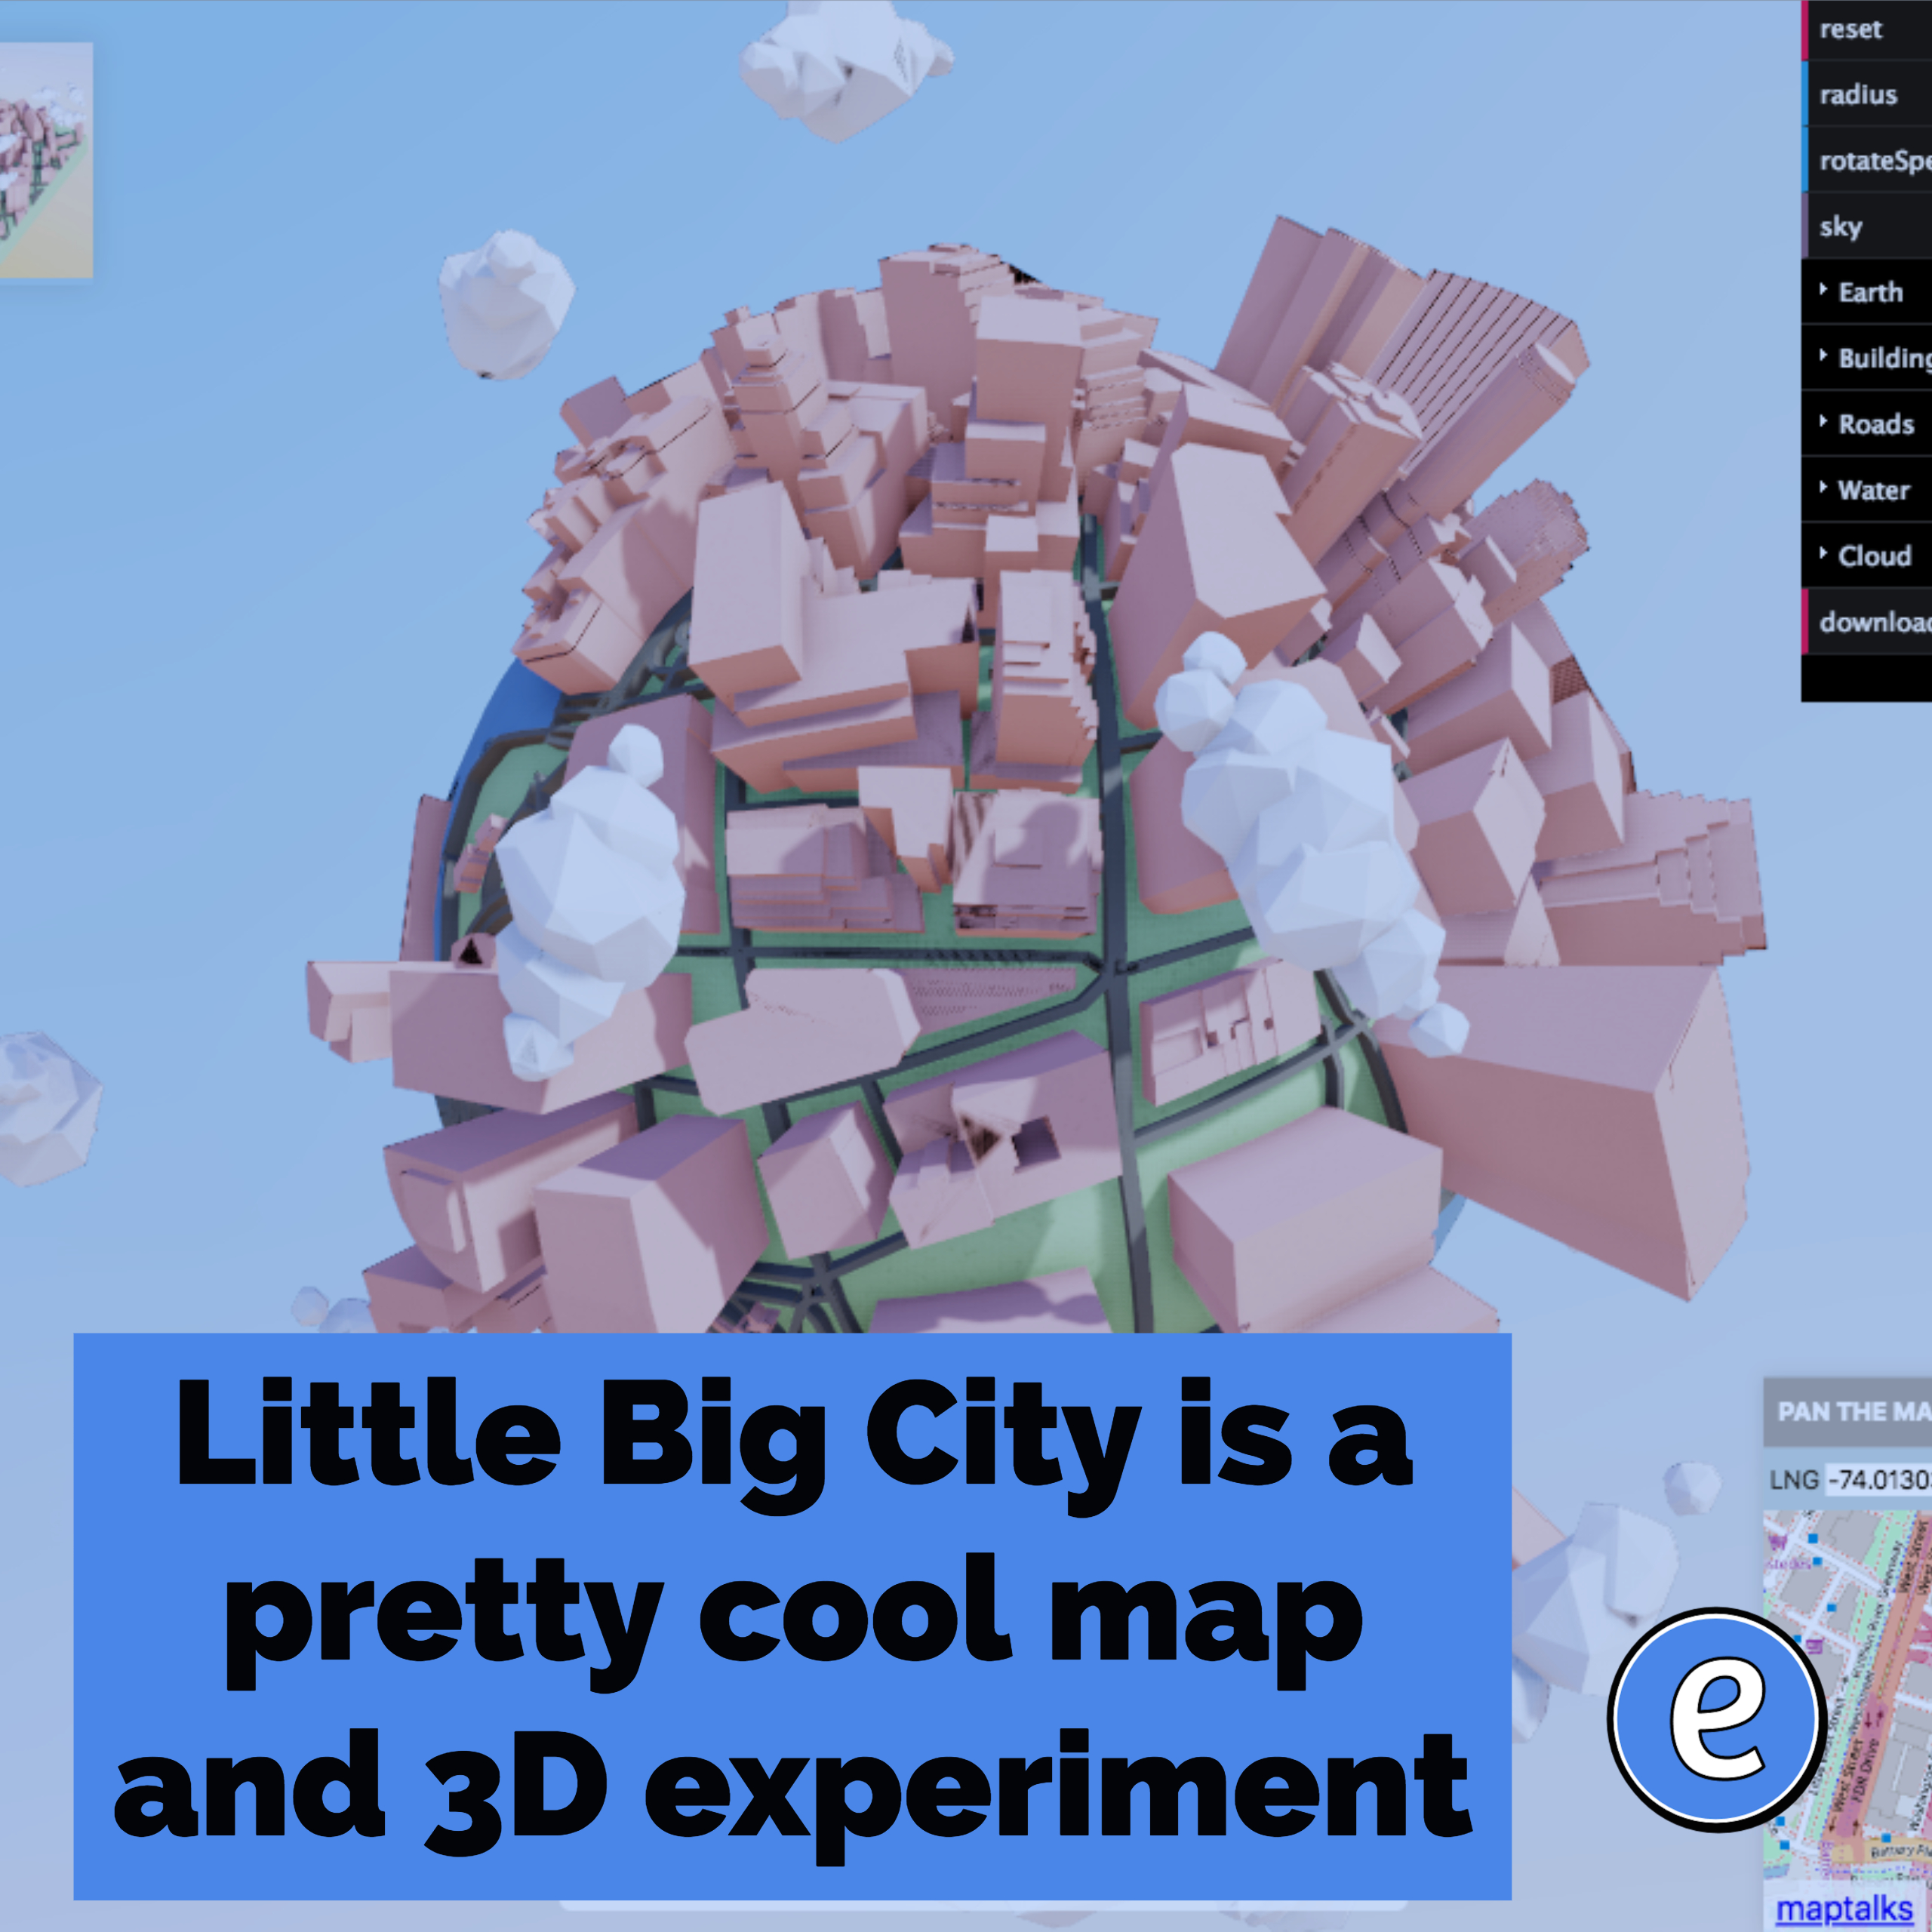 Little Big City is a pretty cool map and 3D experiment